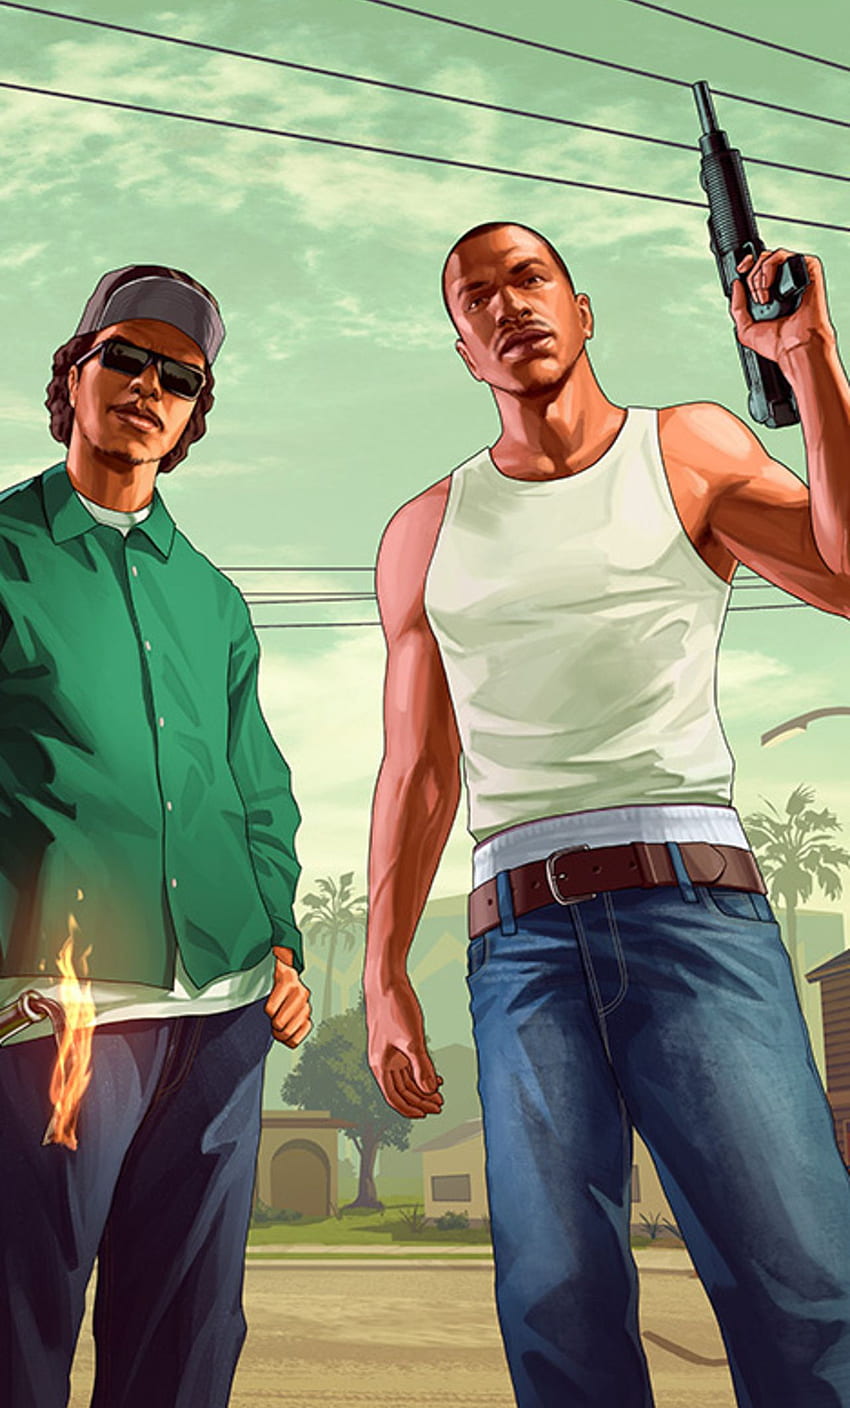 1920x1080 grand theft auto san andreas hd wallpaper for desktop -  Coolwallpapers.me!